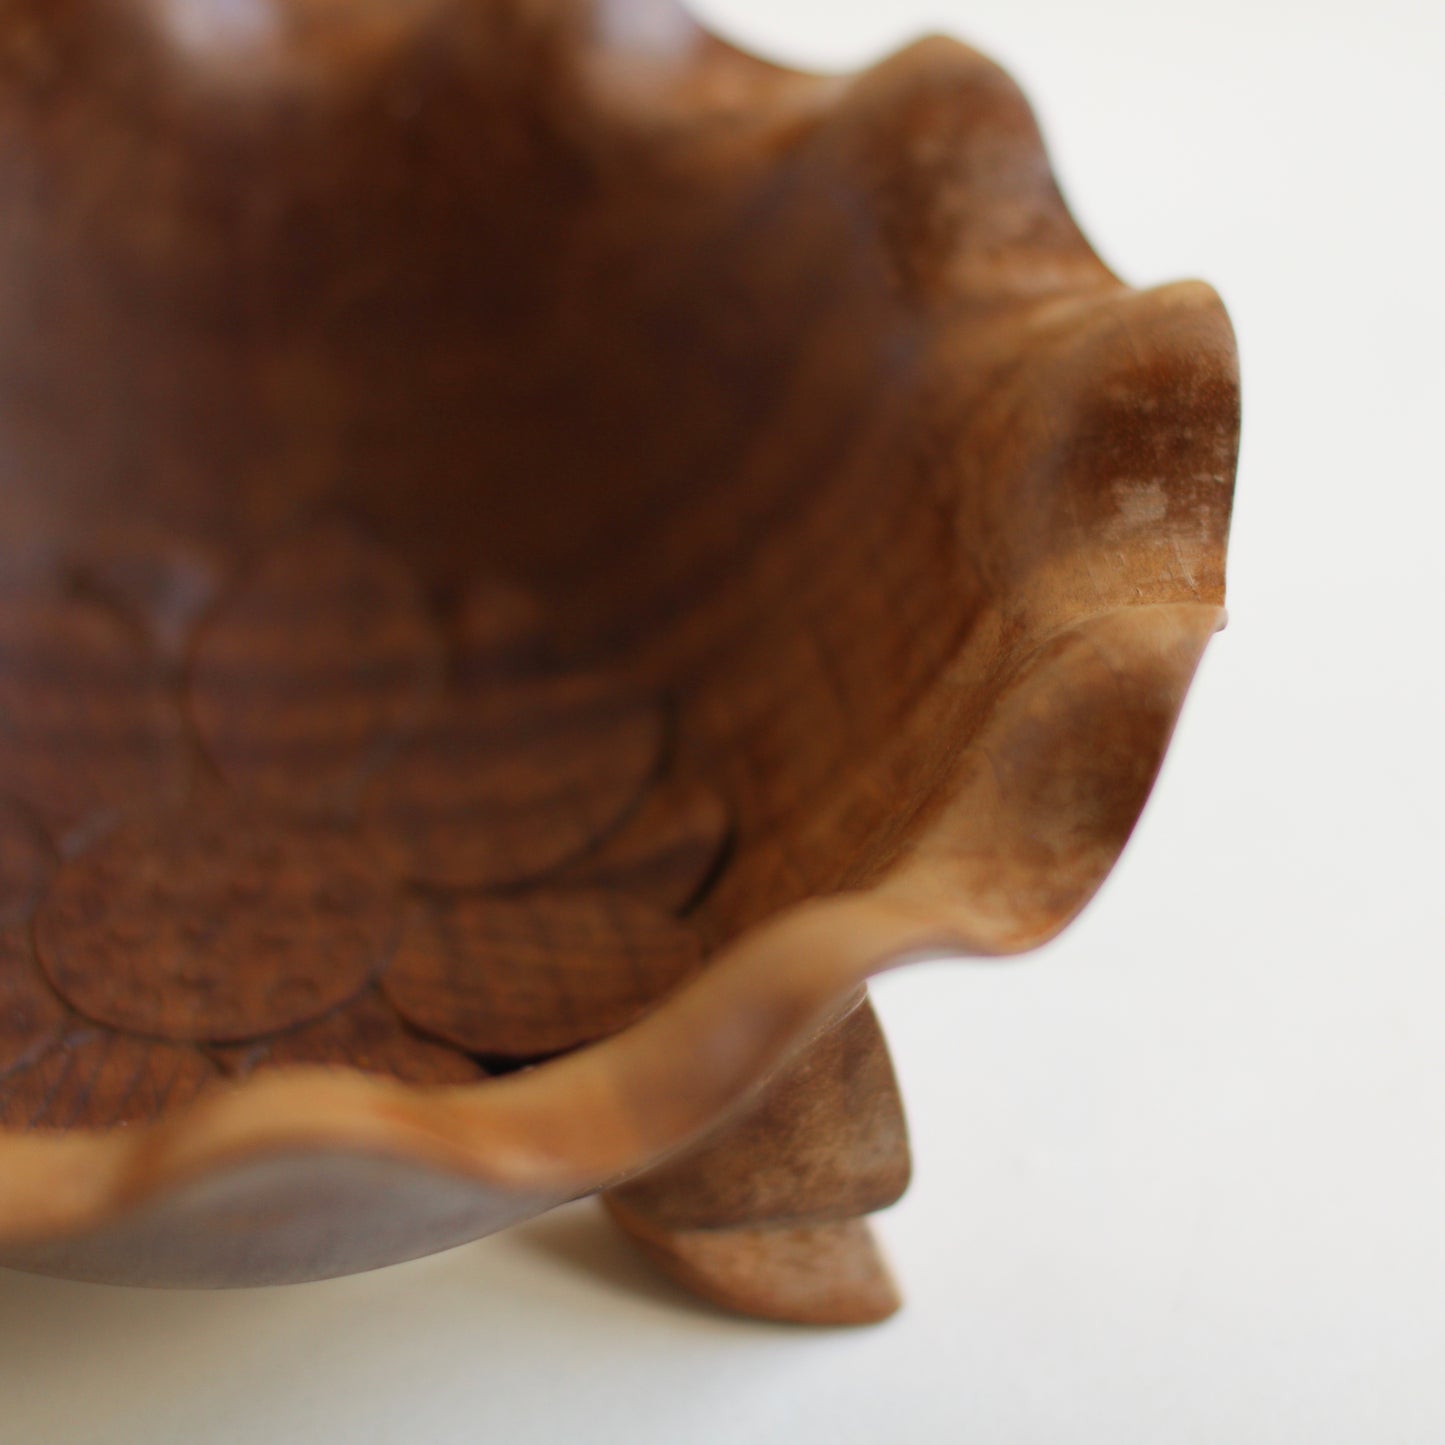 Wooden Footed and Scalloped Edge Bowl